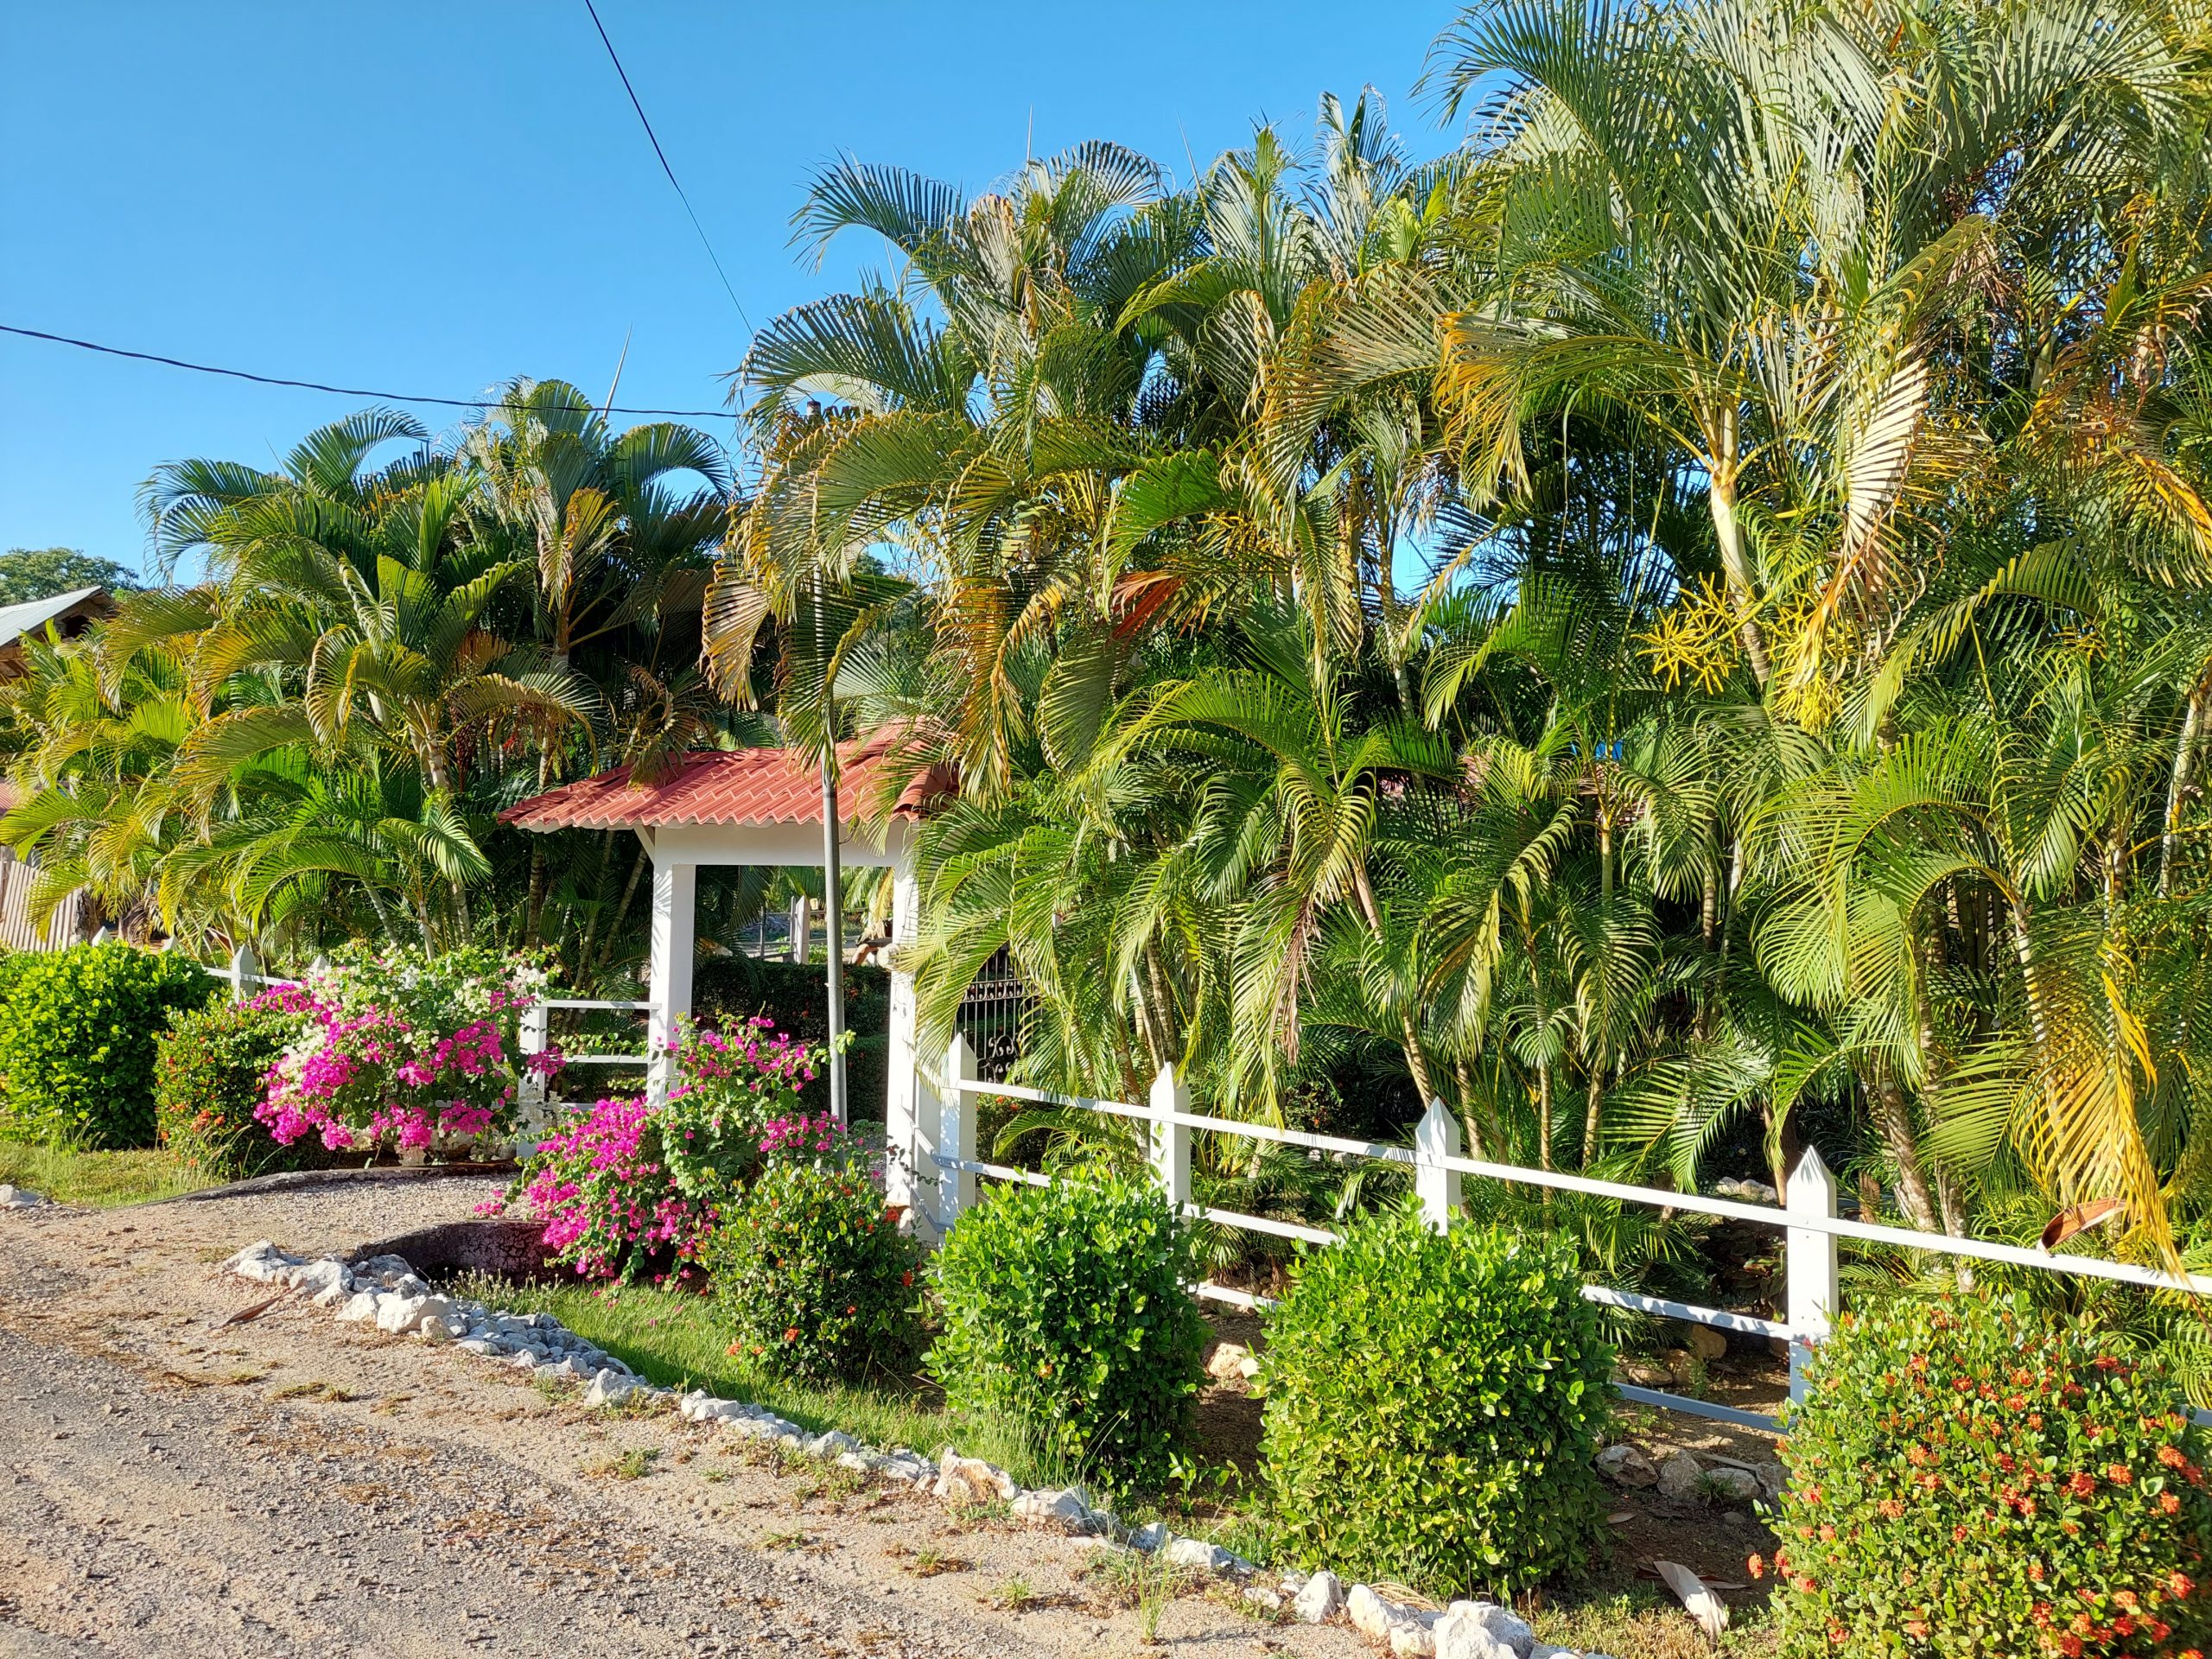 This cozy home is located in the peaceful neighborhood of El Carmen only a 15-minute drive from playa Carrillo.